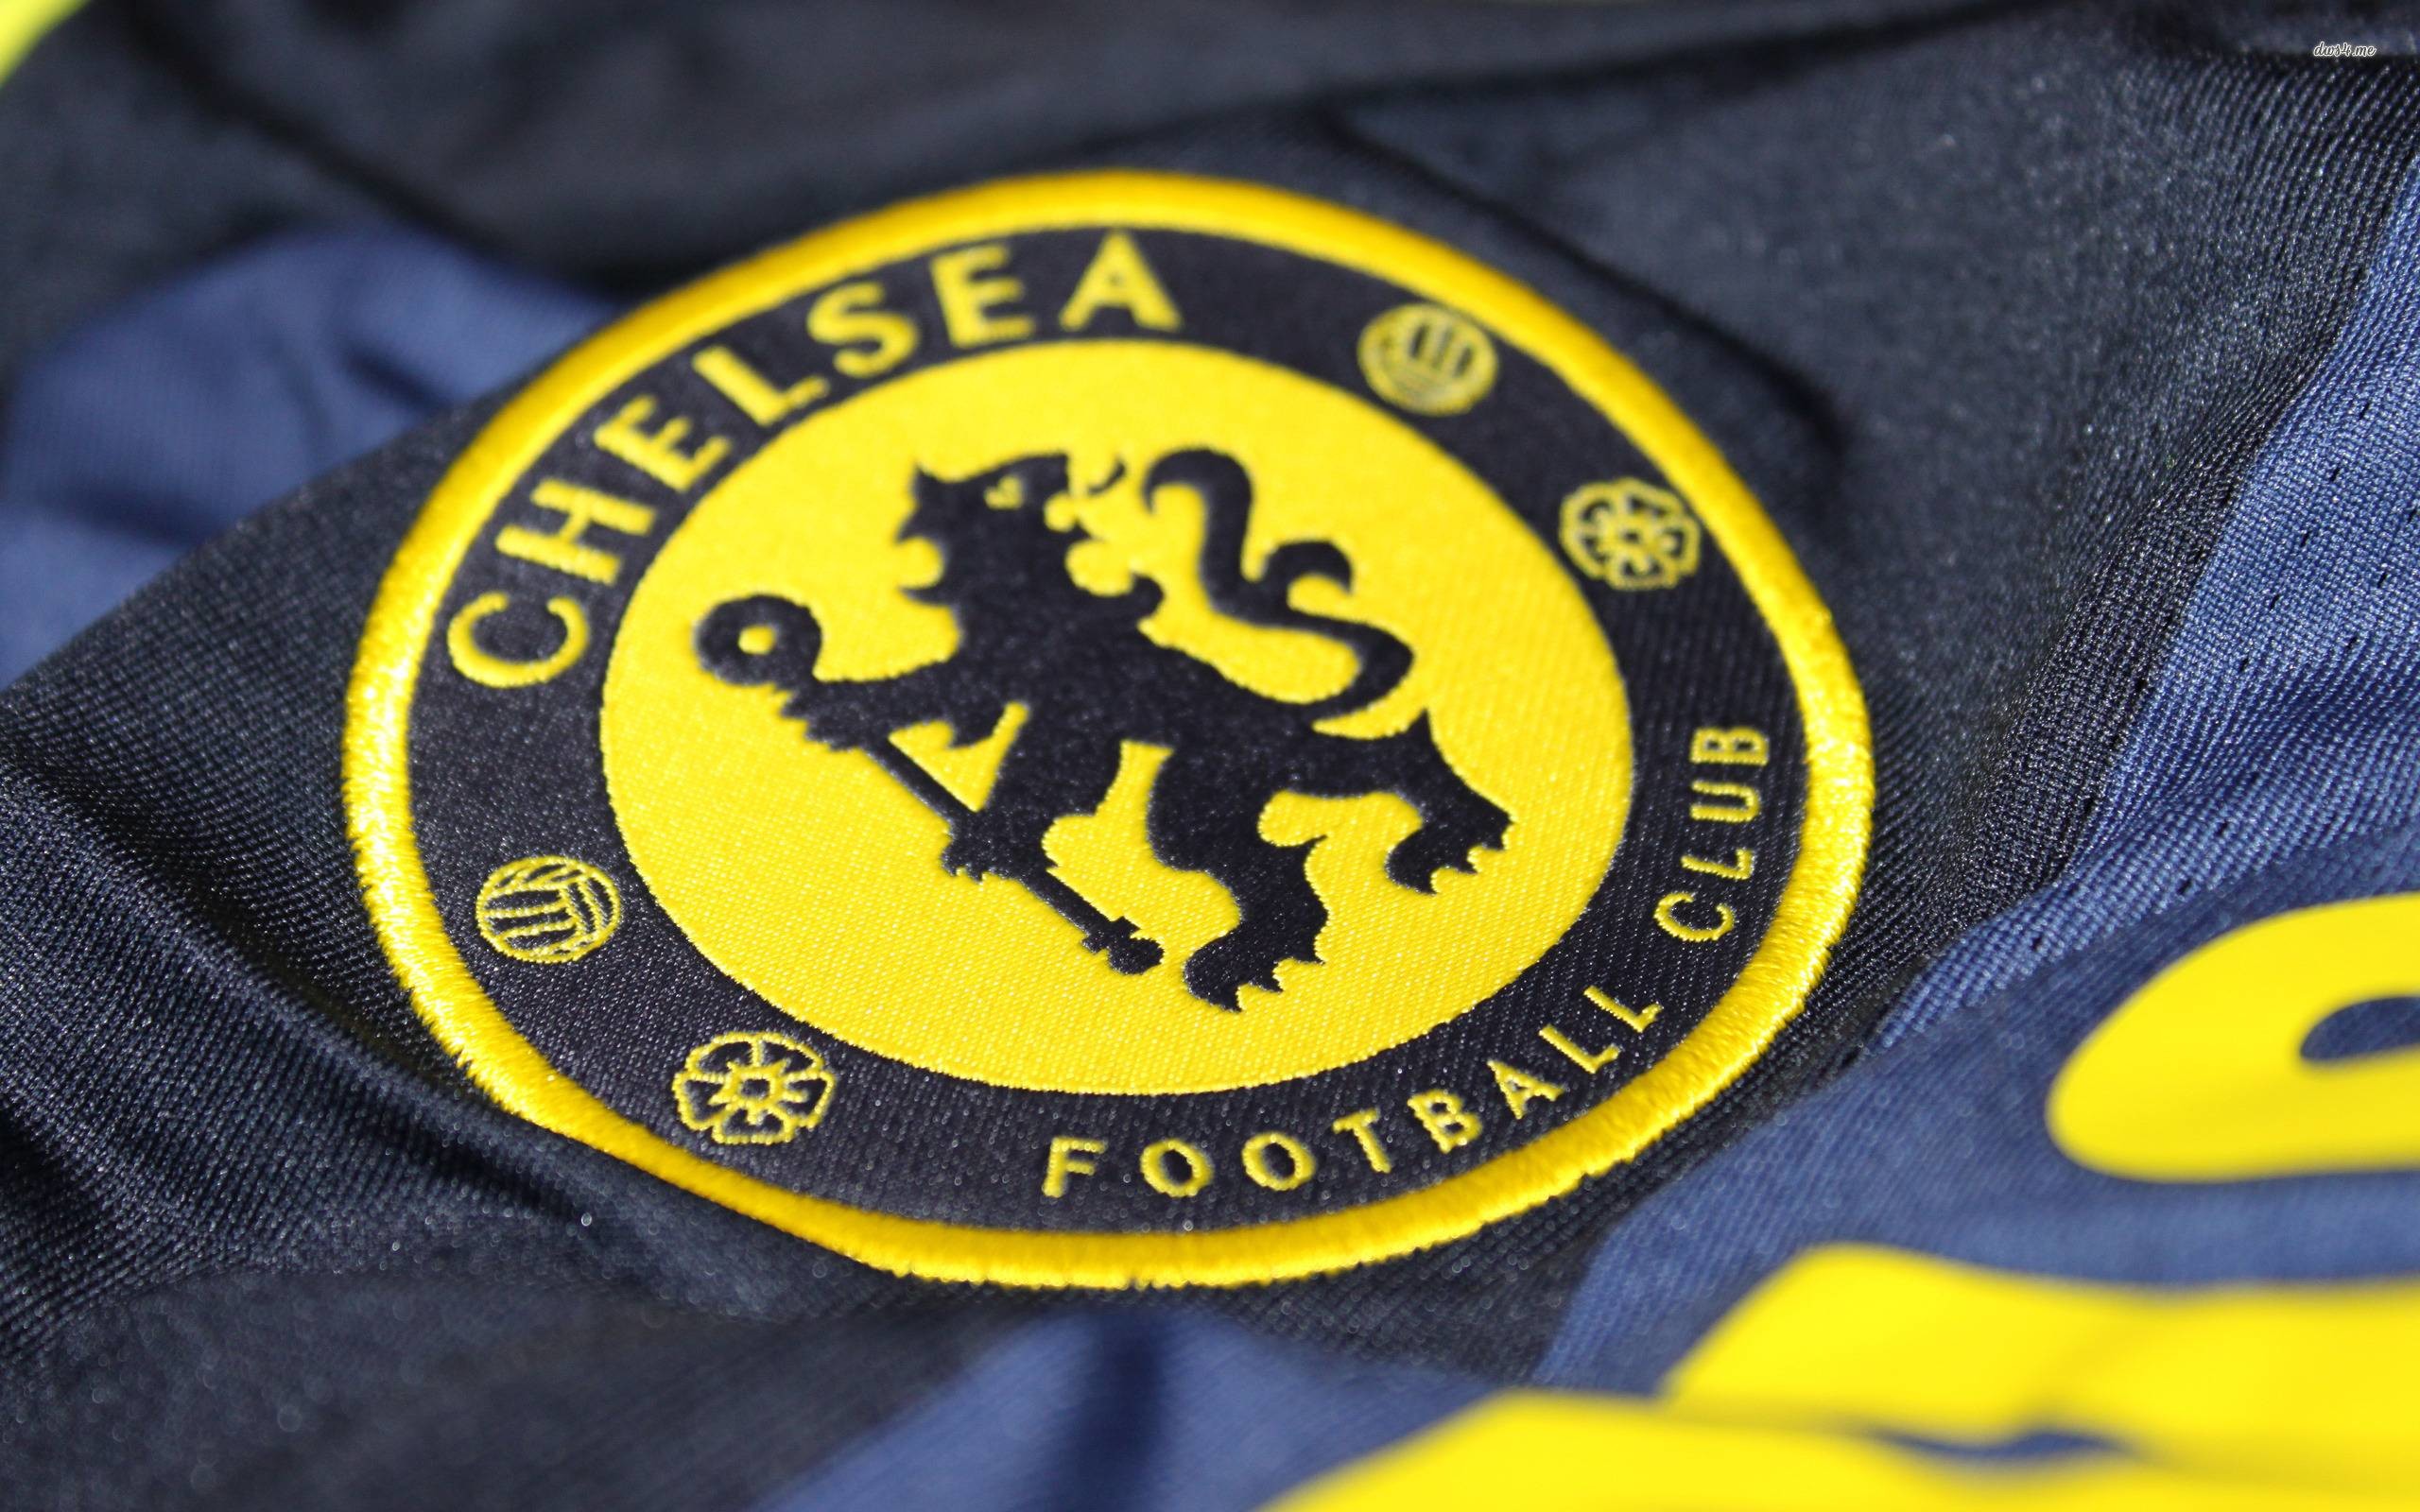 Football Wallpapers Chelsea FC (71+ images)